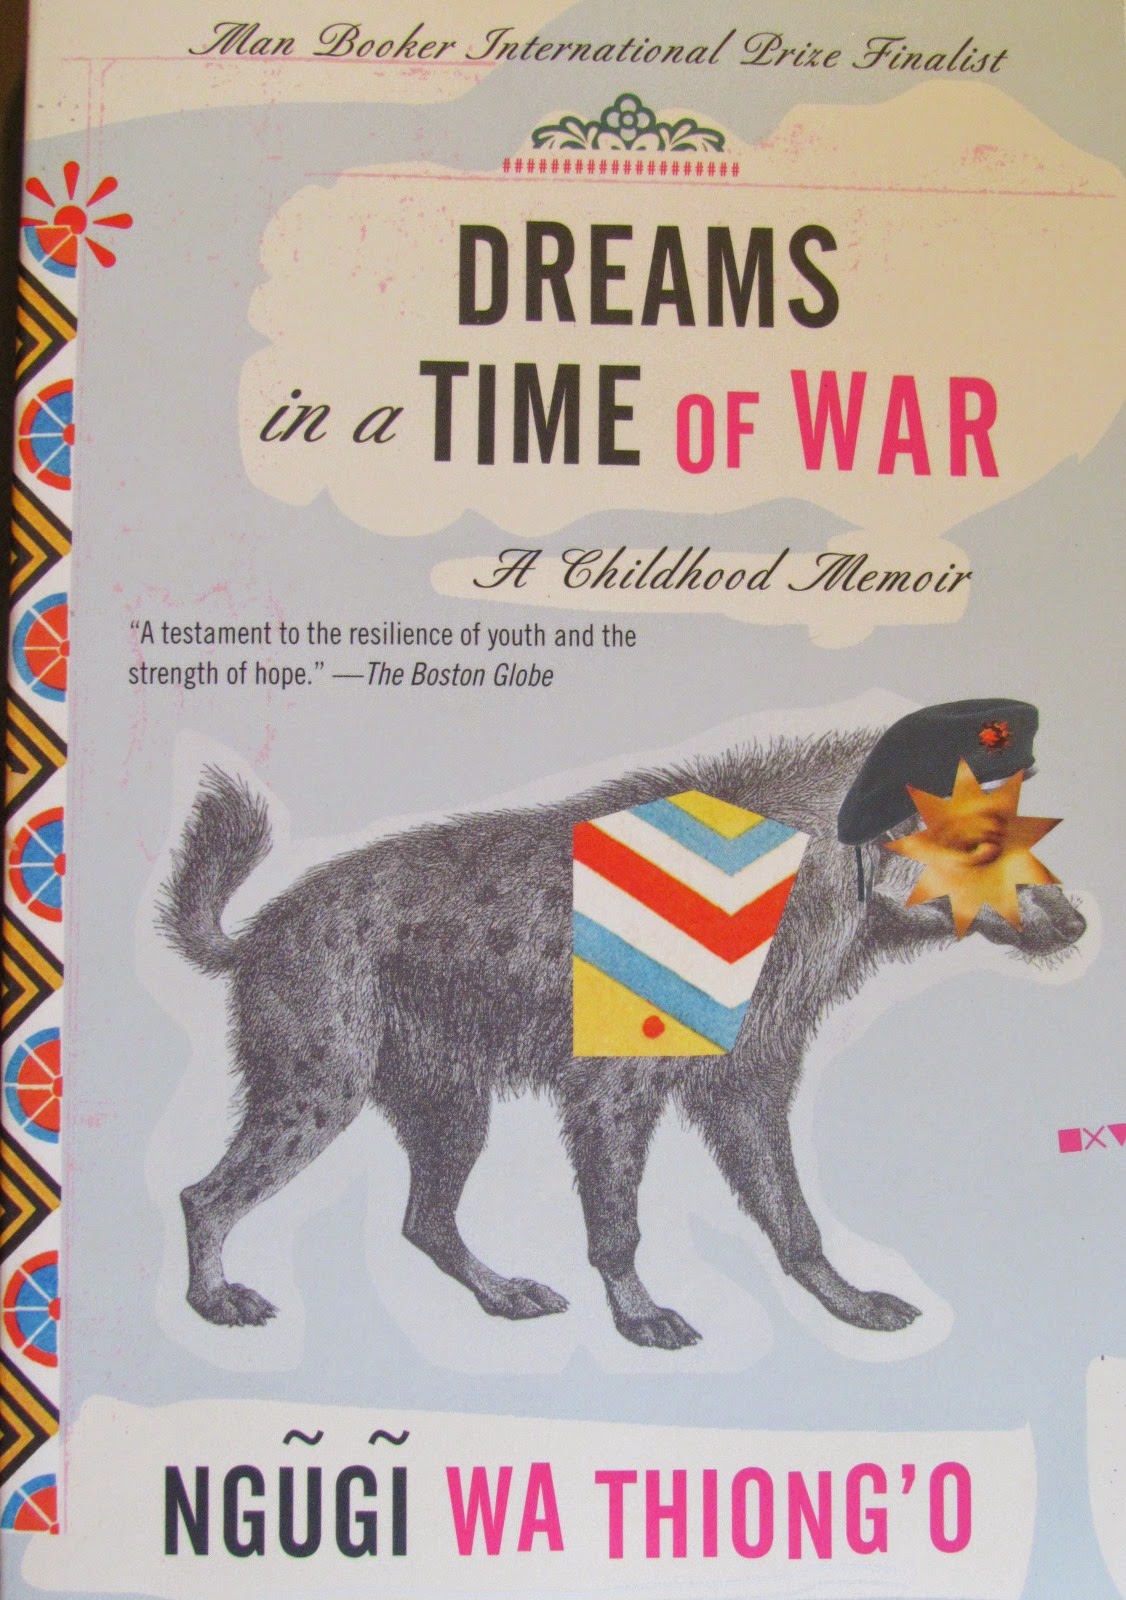 Dreams in a Time of War by Ngugi wa Thiong'o: book review